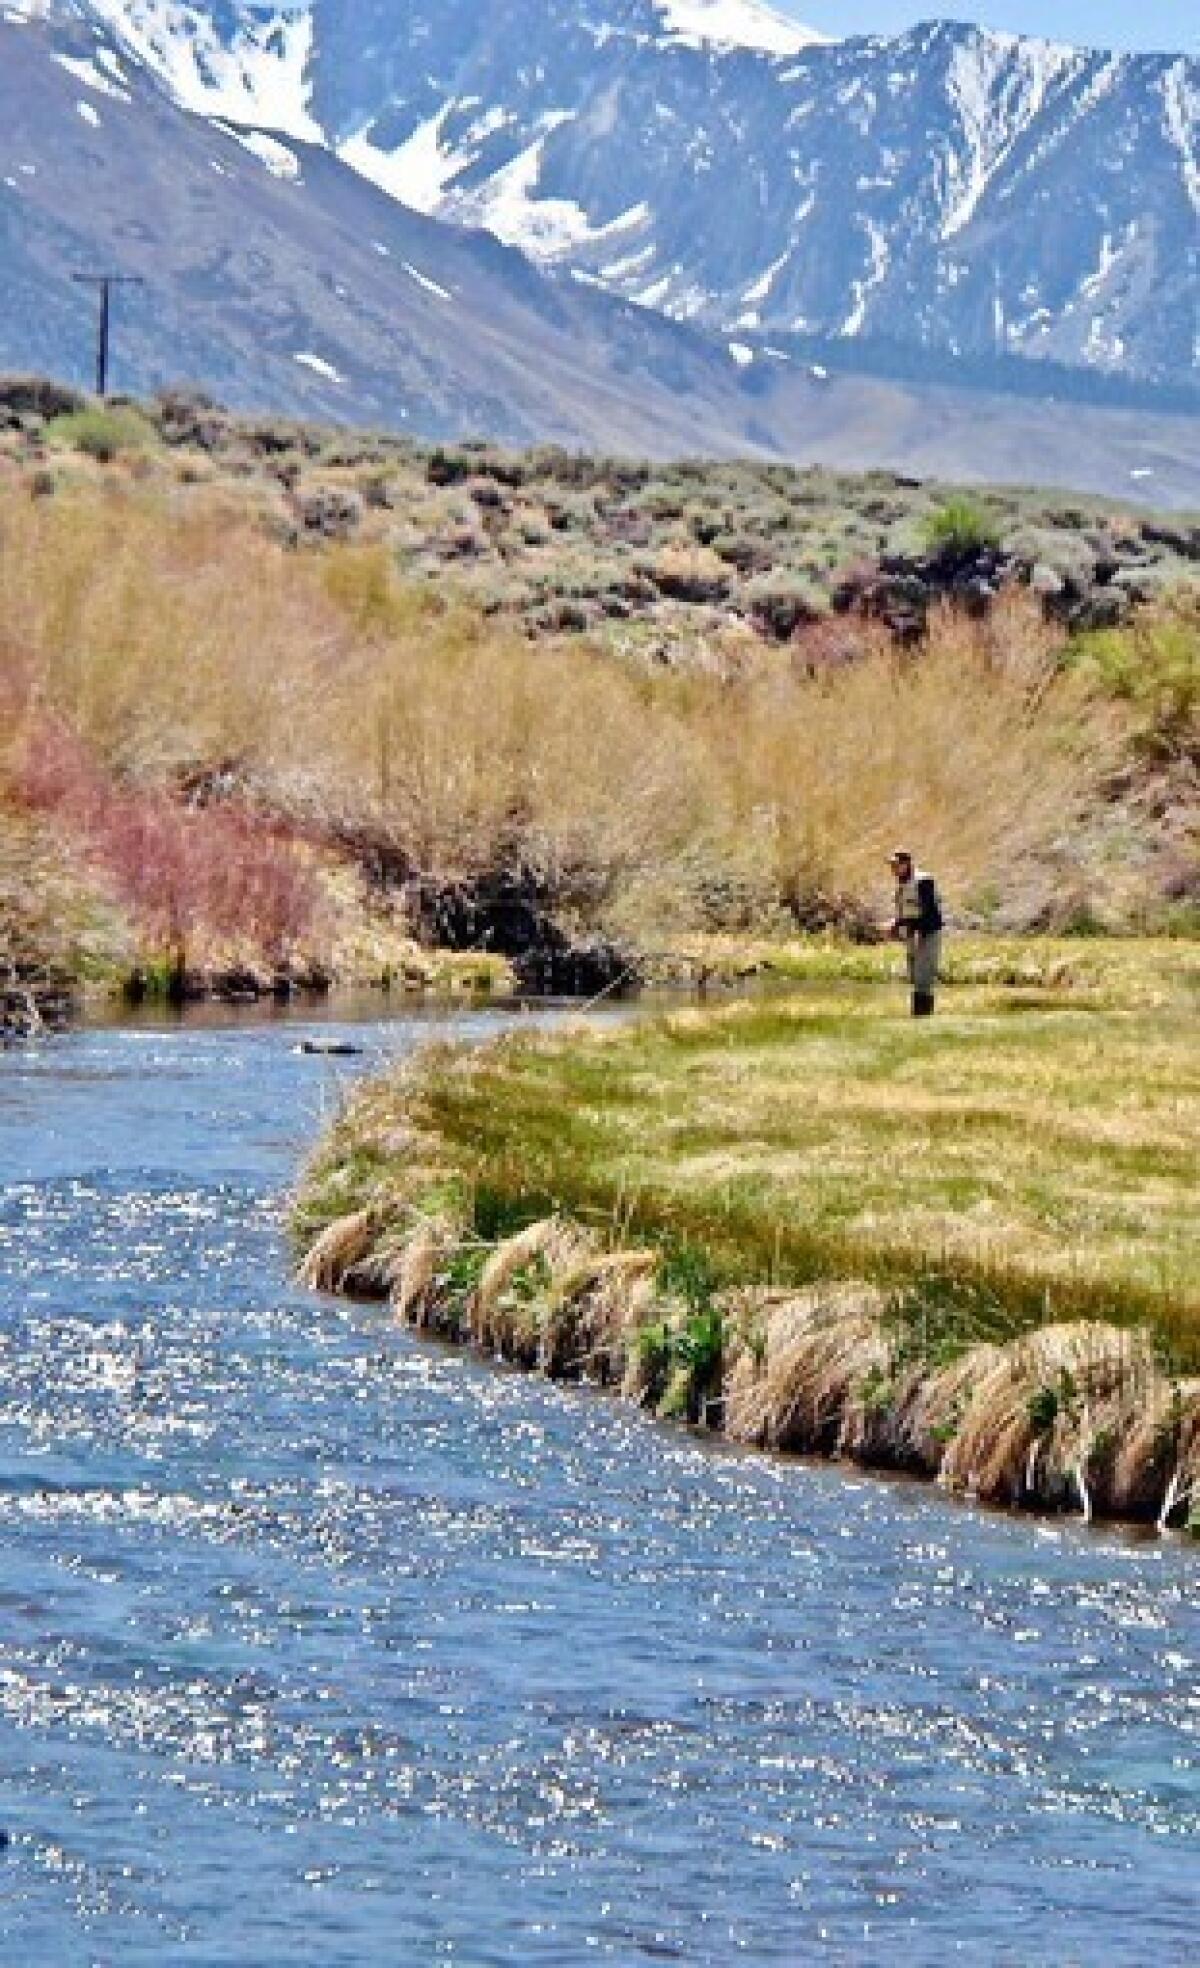 Hot Creek Ranch, outside Mammoth Lakes, has a two-mile stretch for fly fishing.